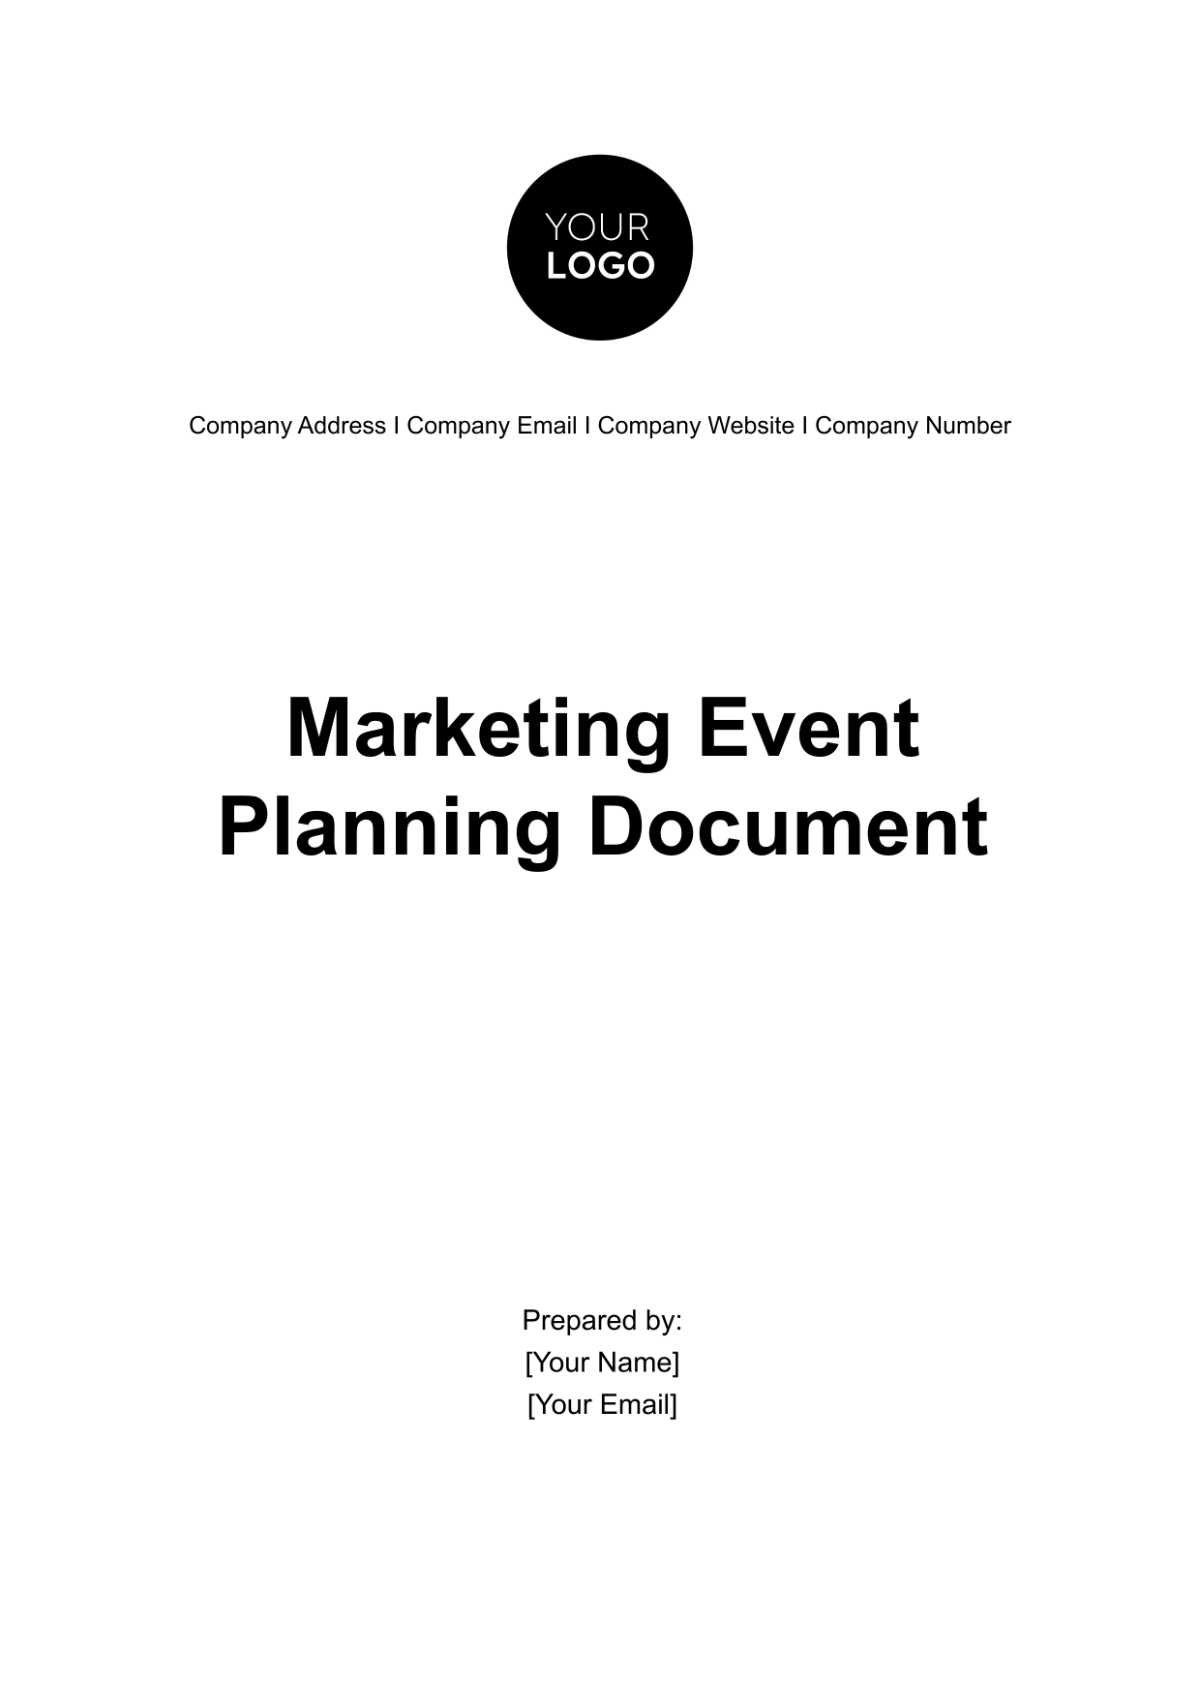 Free Marketing Event Planning Document Template